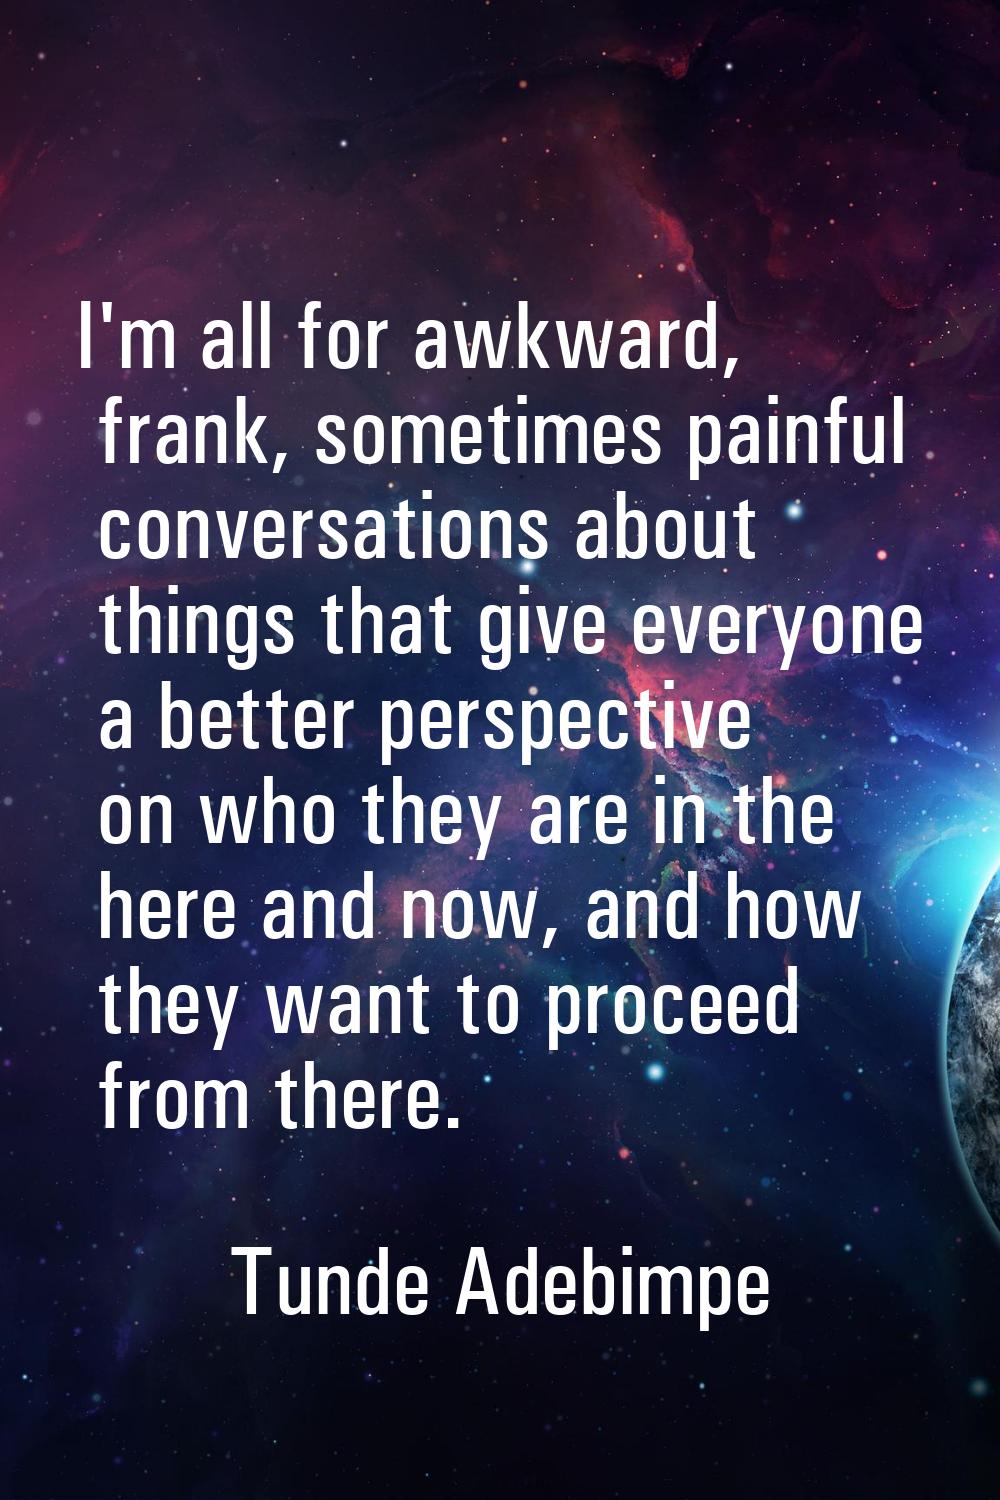 I'm all for awkward, frank, sometimes painful conversations about things that give everyone a bette